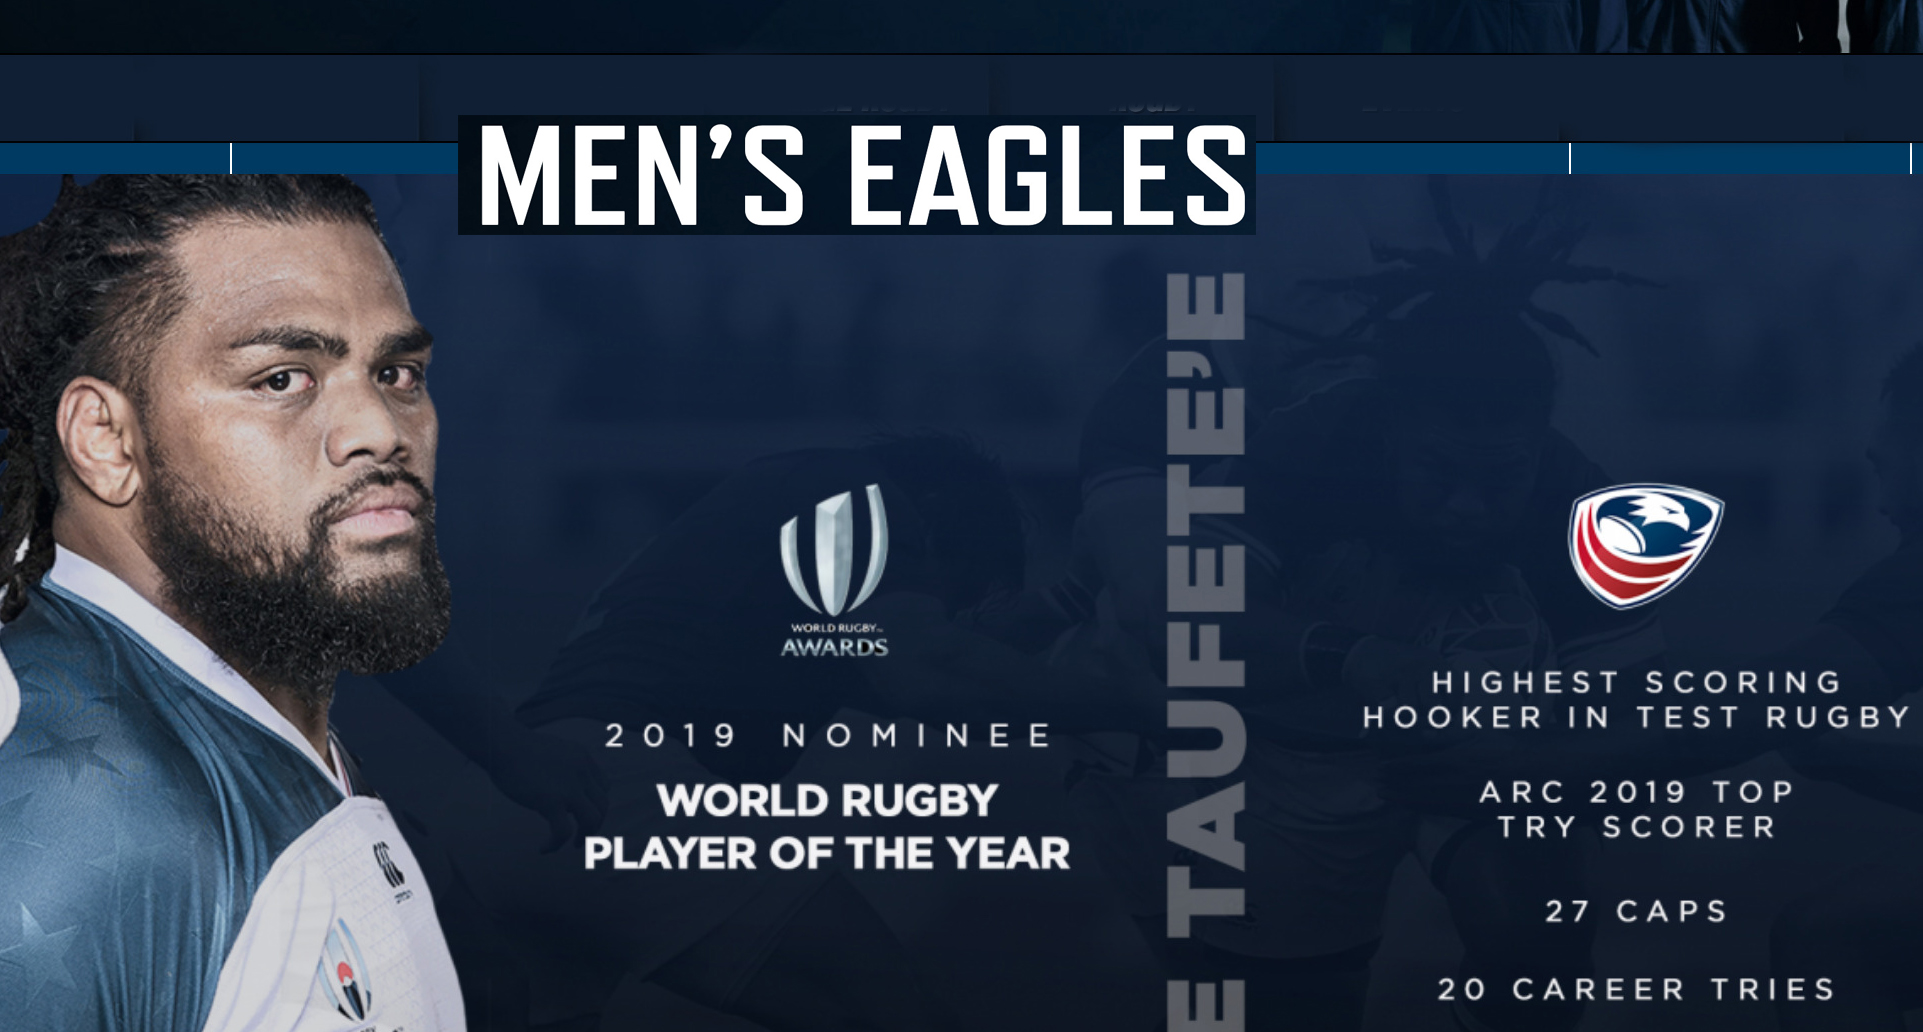 USA Eagle Joe Taufete’e, World Rugby Men’s Player of the Year